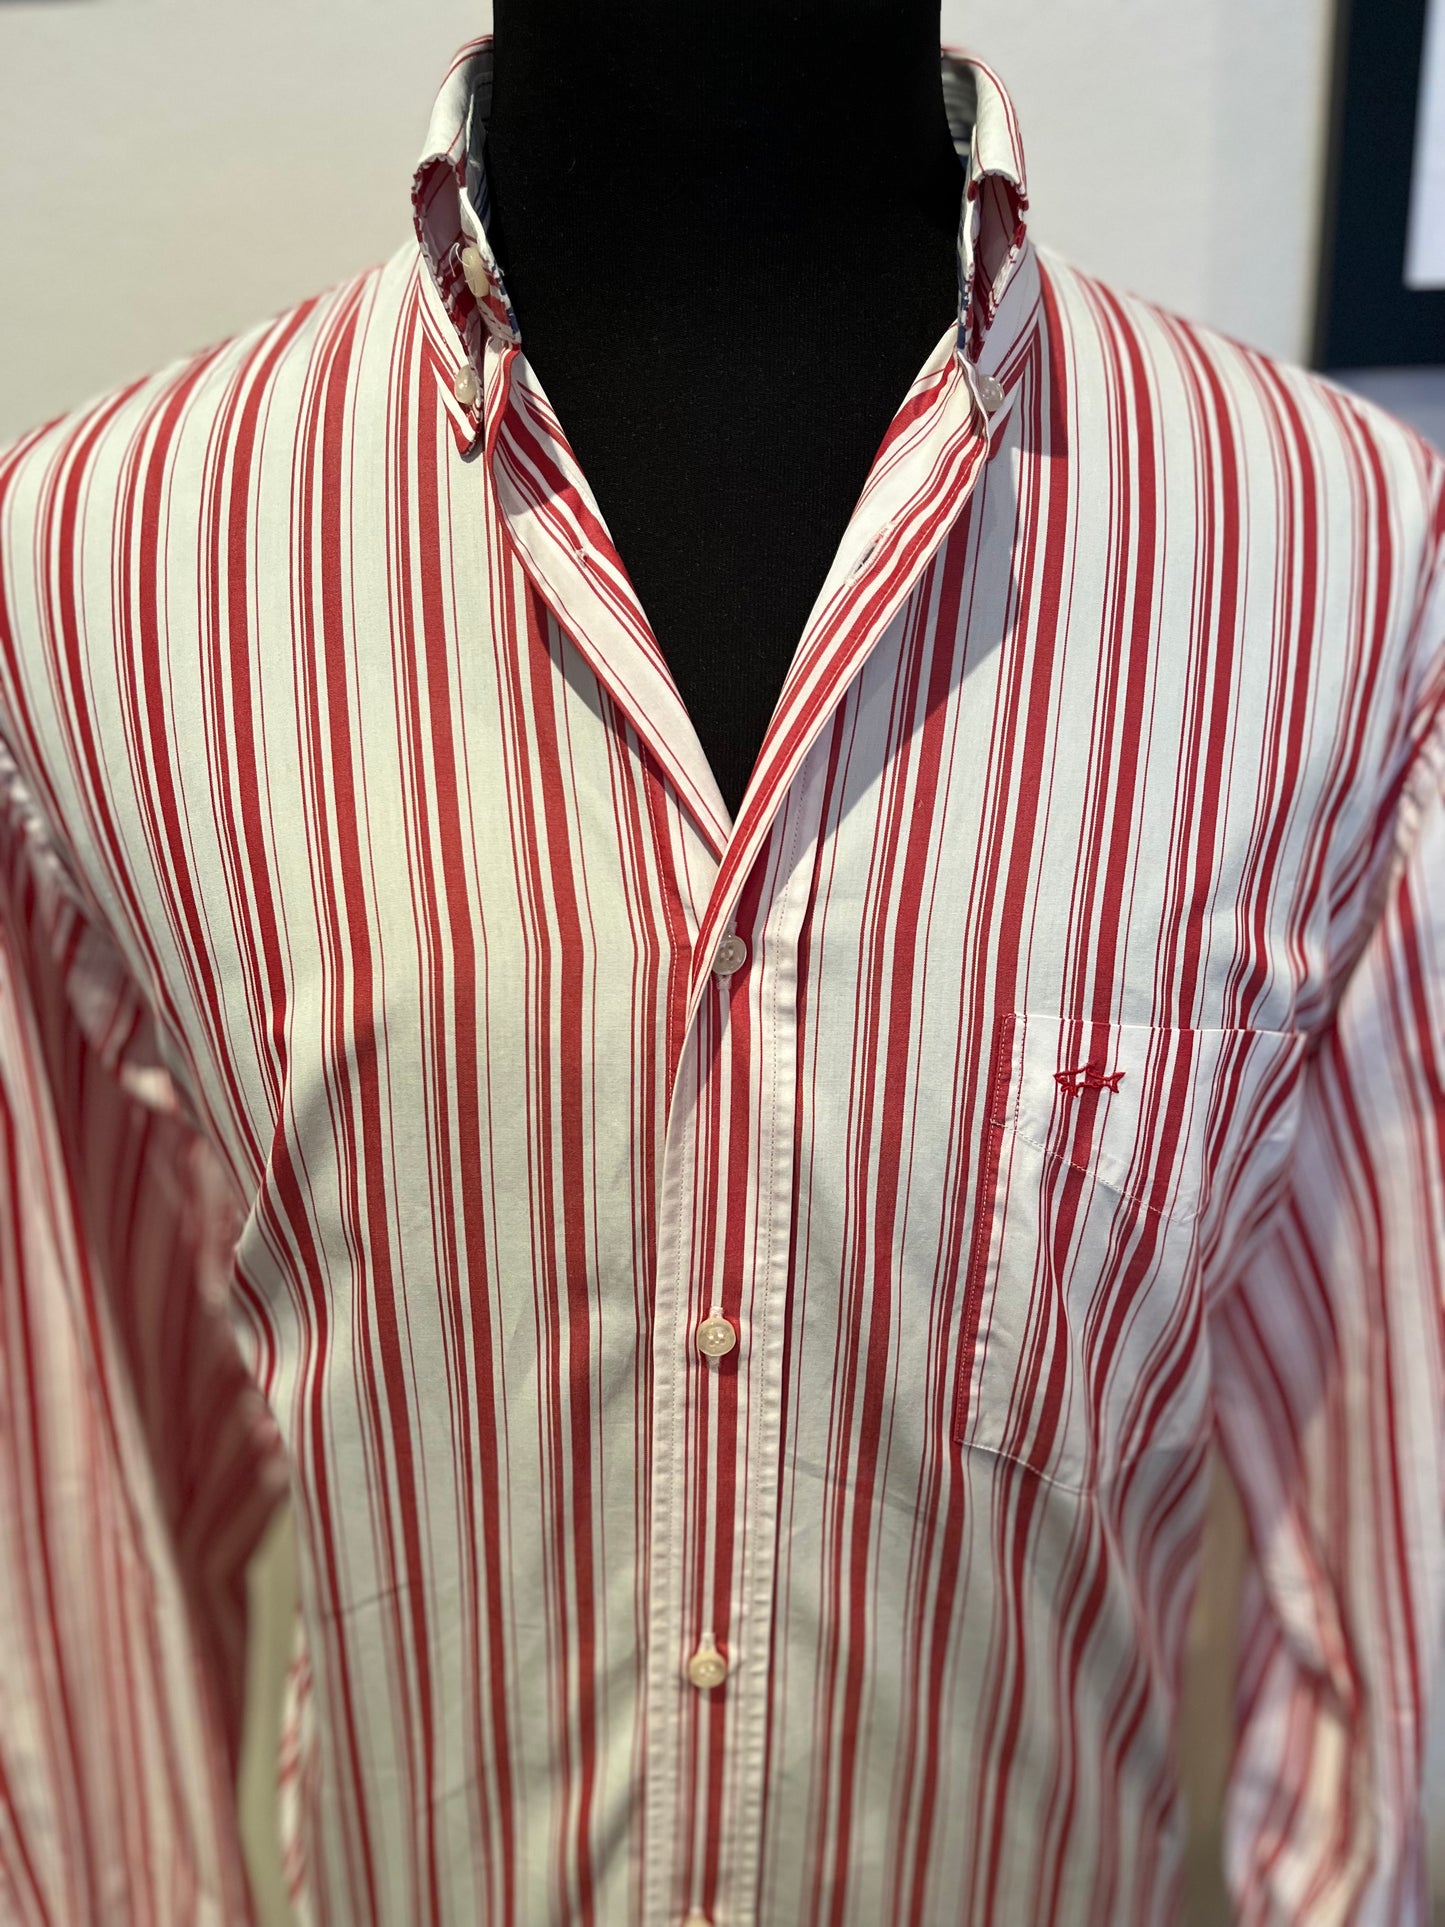 Paul & Shark 100% Cotton Red White Stripe Shirt Size 42 Large Made in Italy Button Down Collar